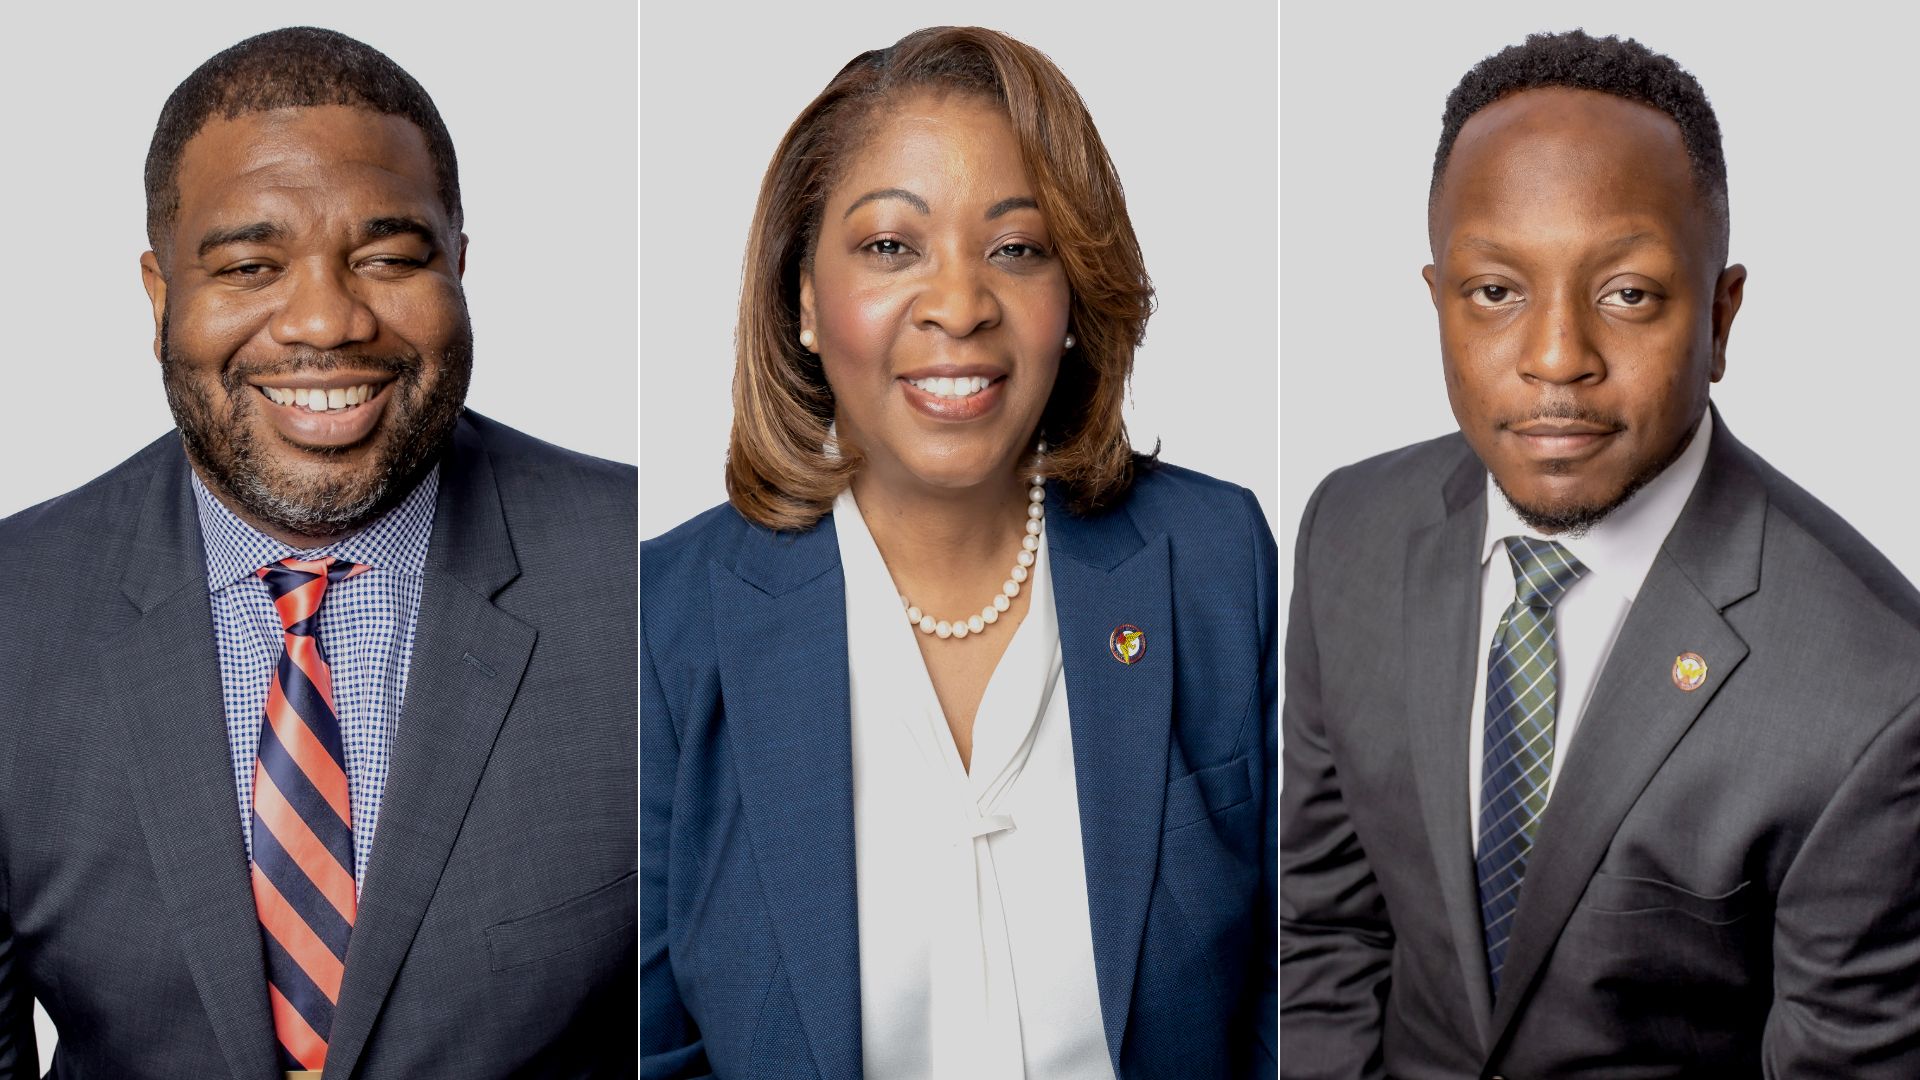 Three headshots of City Hall leaders — two men and one woman